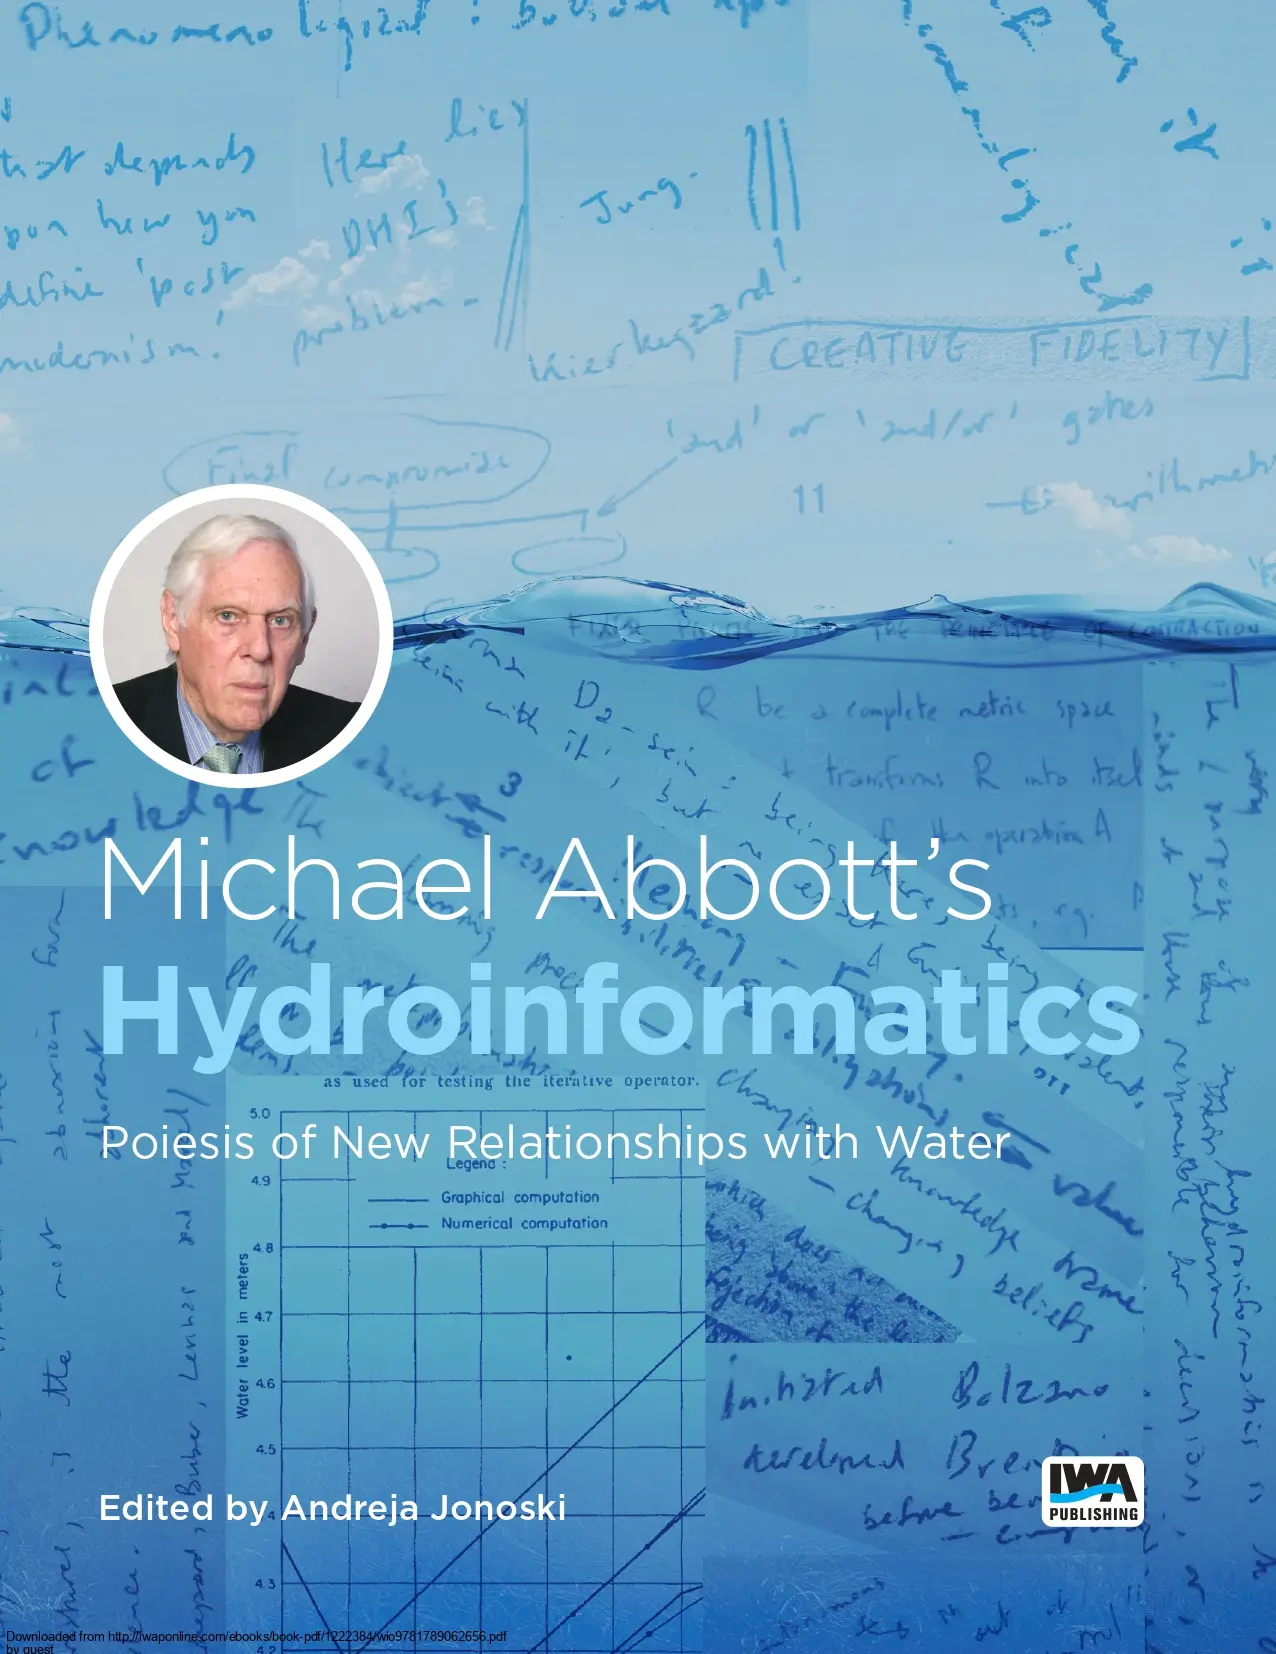 Michael Abbott’s Hydroinformatics Poiesis of New Relationships with Water